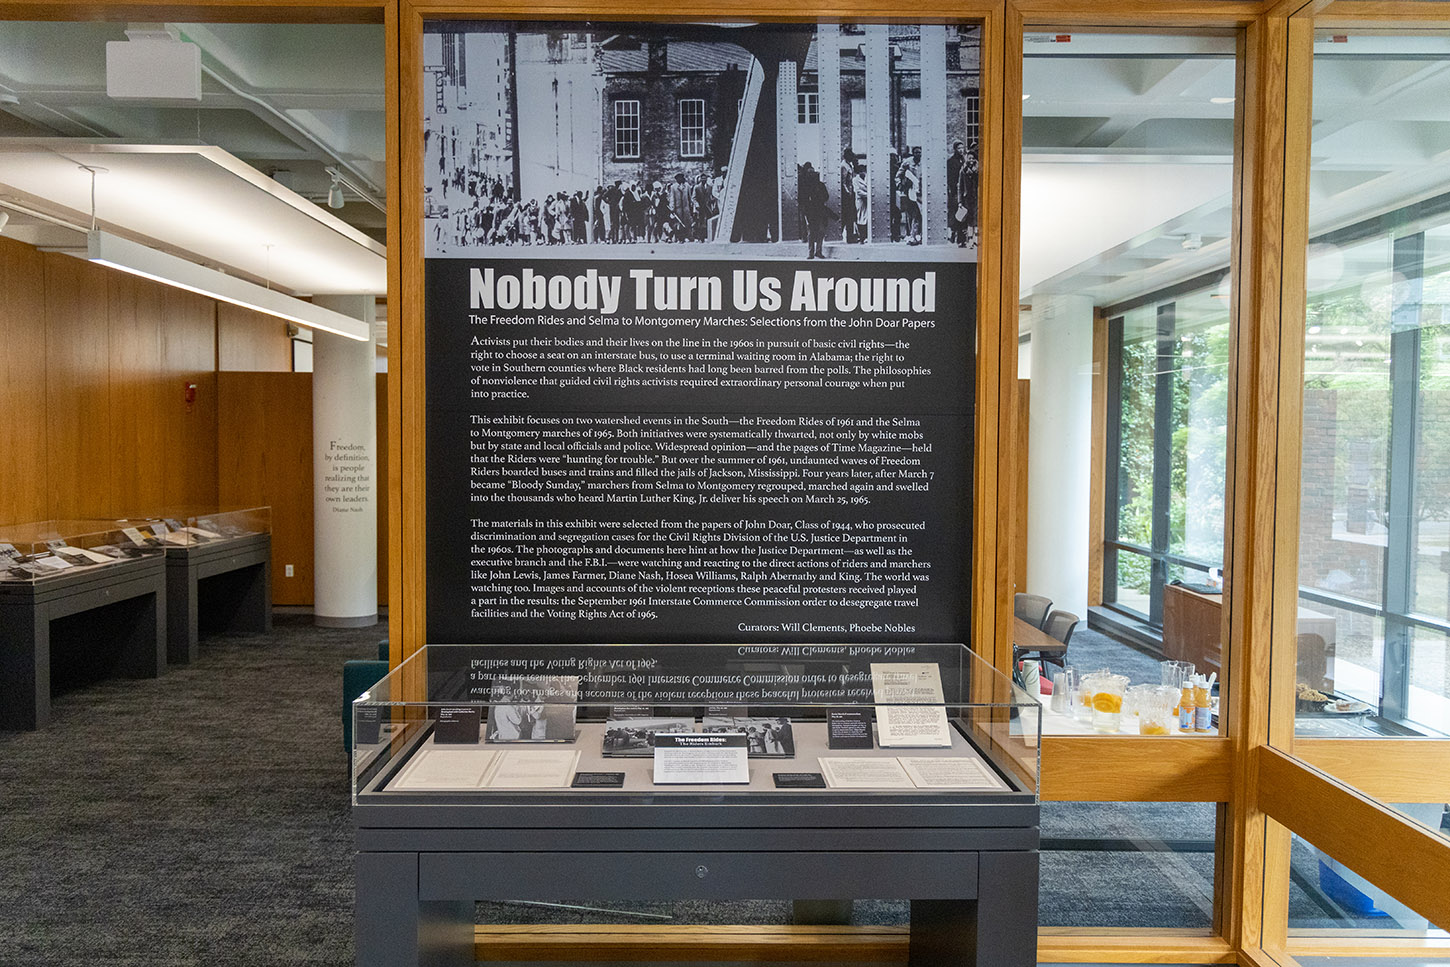 Opening panel and exhibit case for the "Nobody Turn Us Around" exhibition